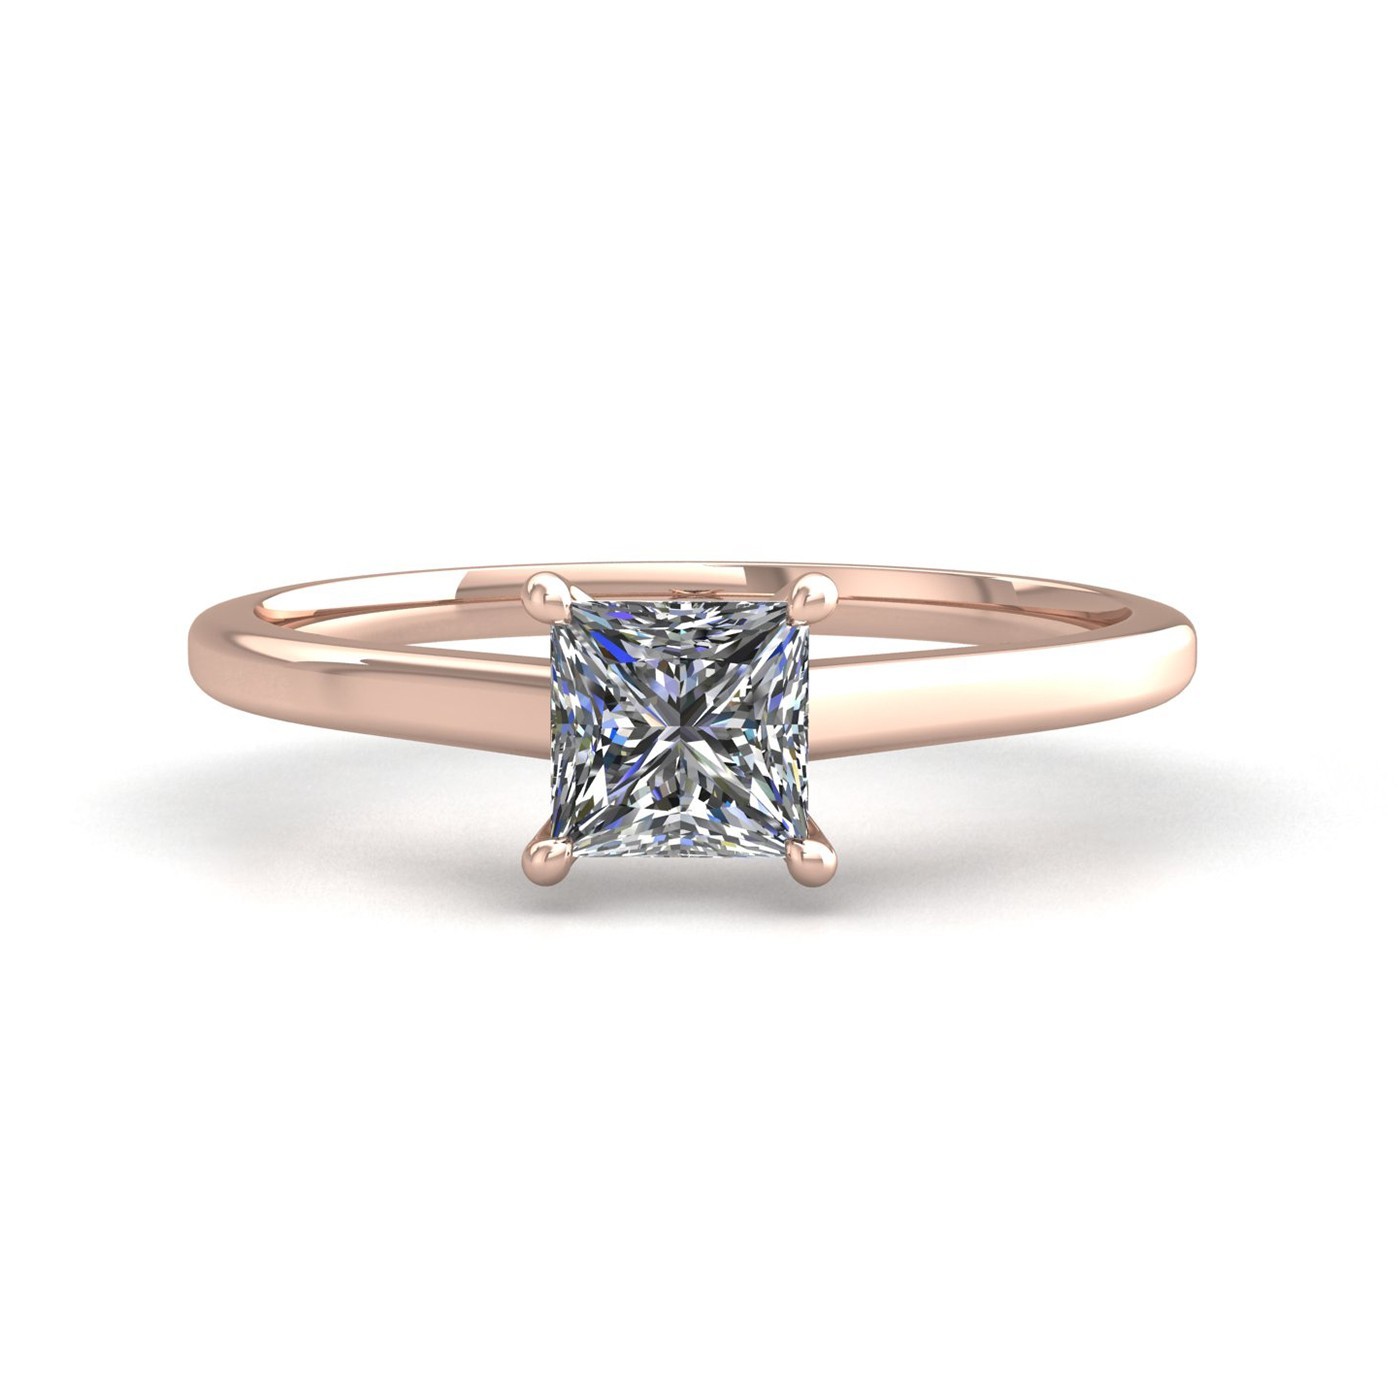 18k rose gold  0,30 ct 4 prongs solitaire princess cut diamond engagement ring with whisper thin band Photos & images